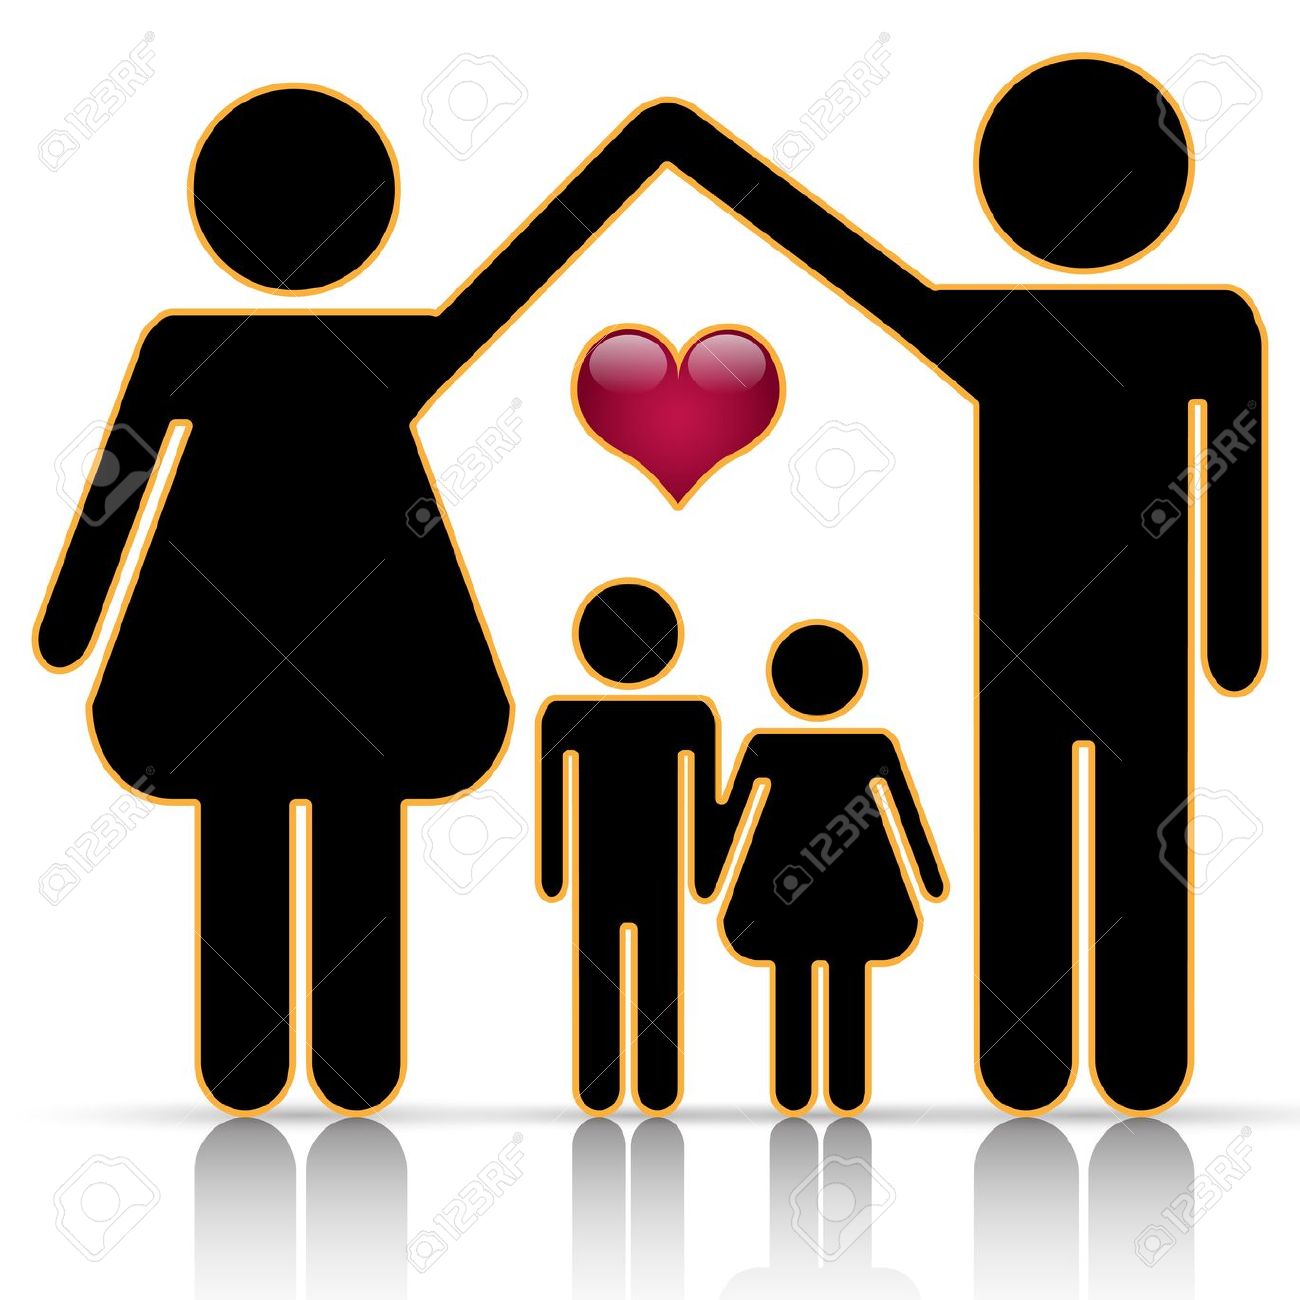 Silhouette at getdrawings com. Family clipart